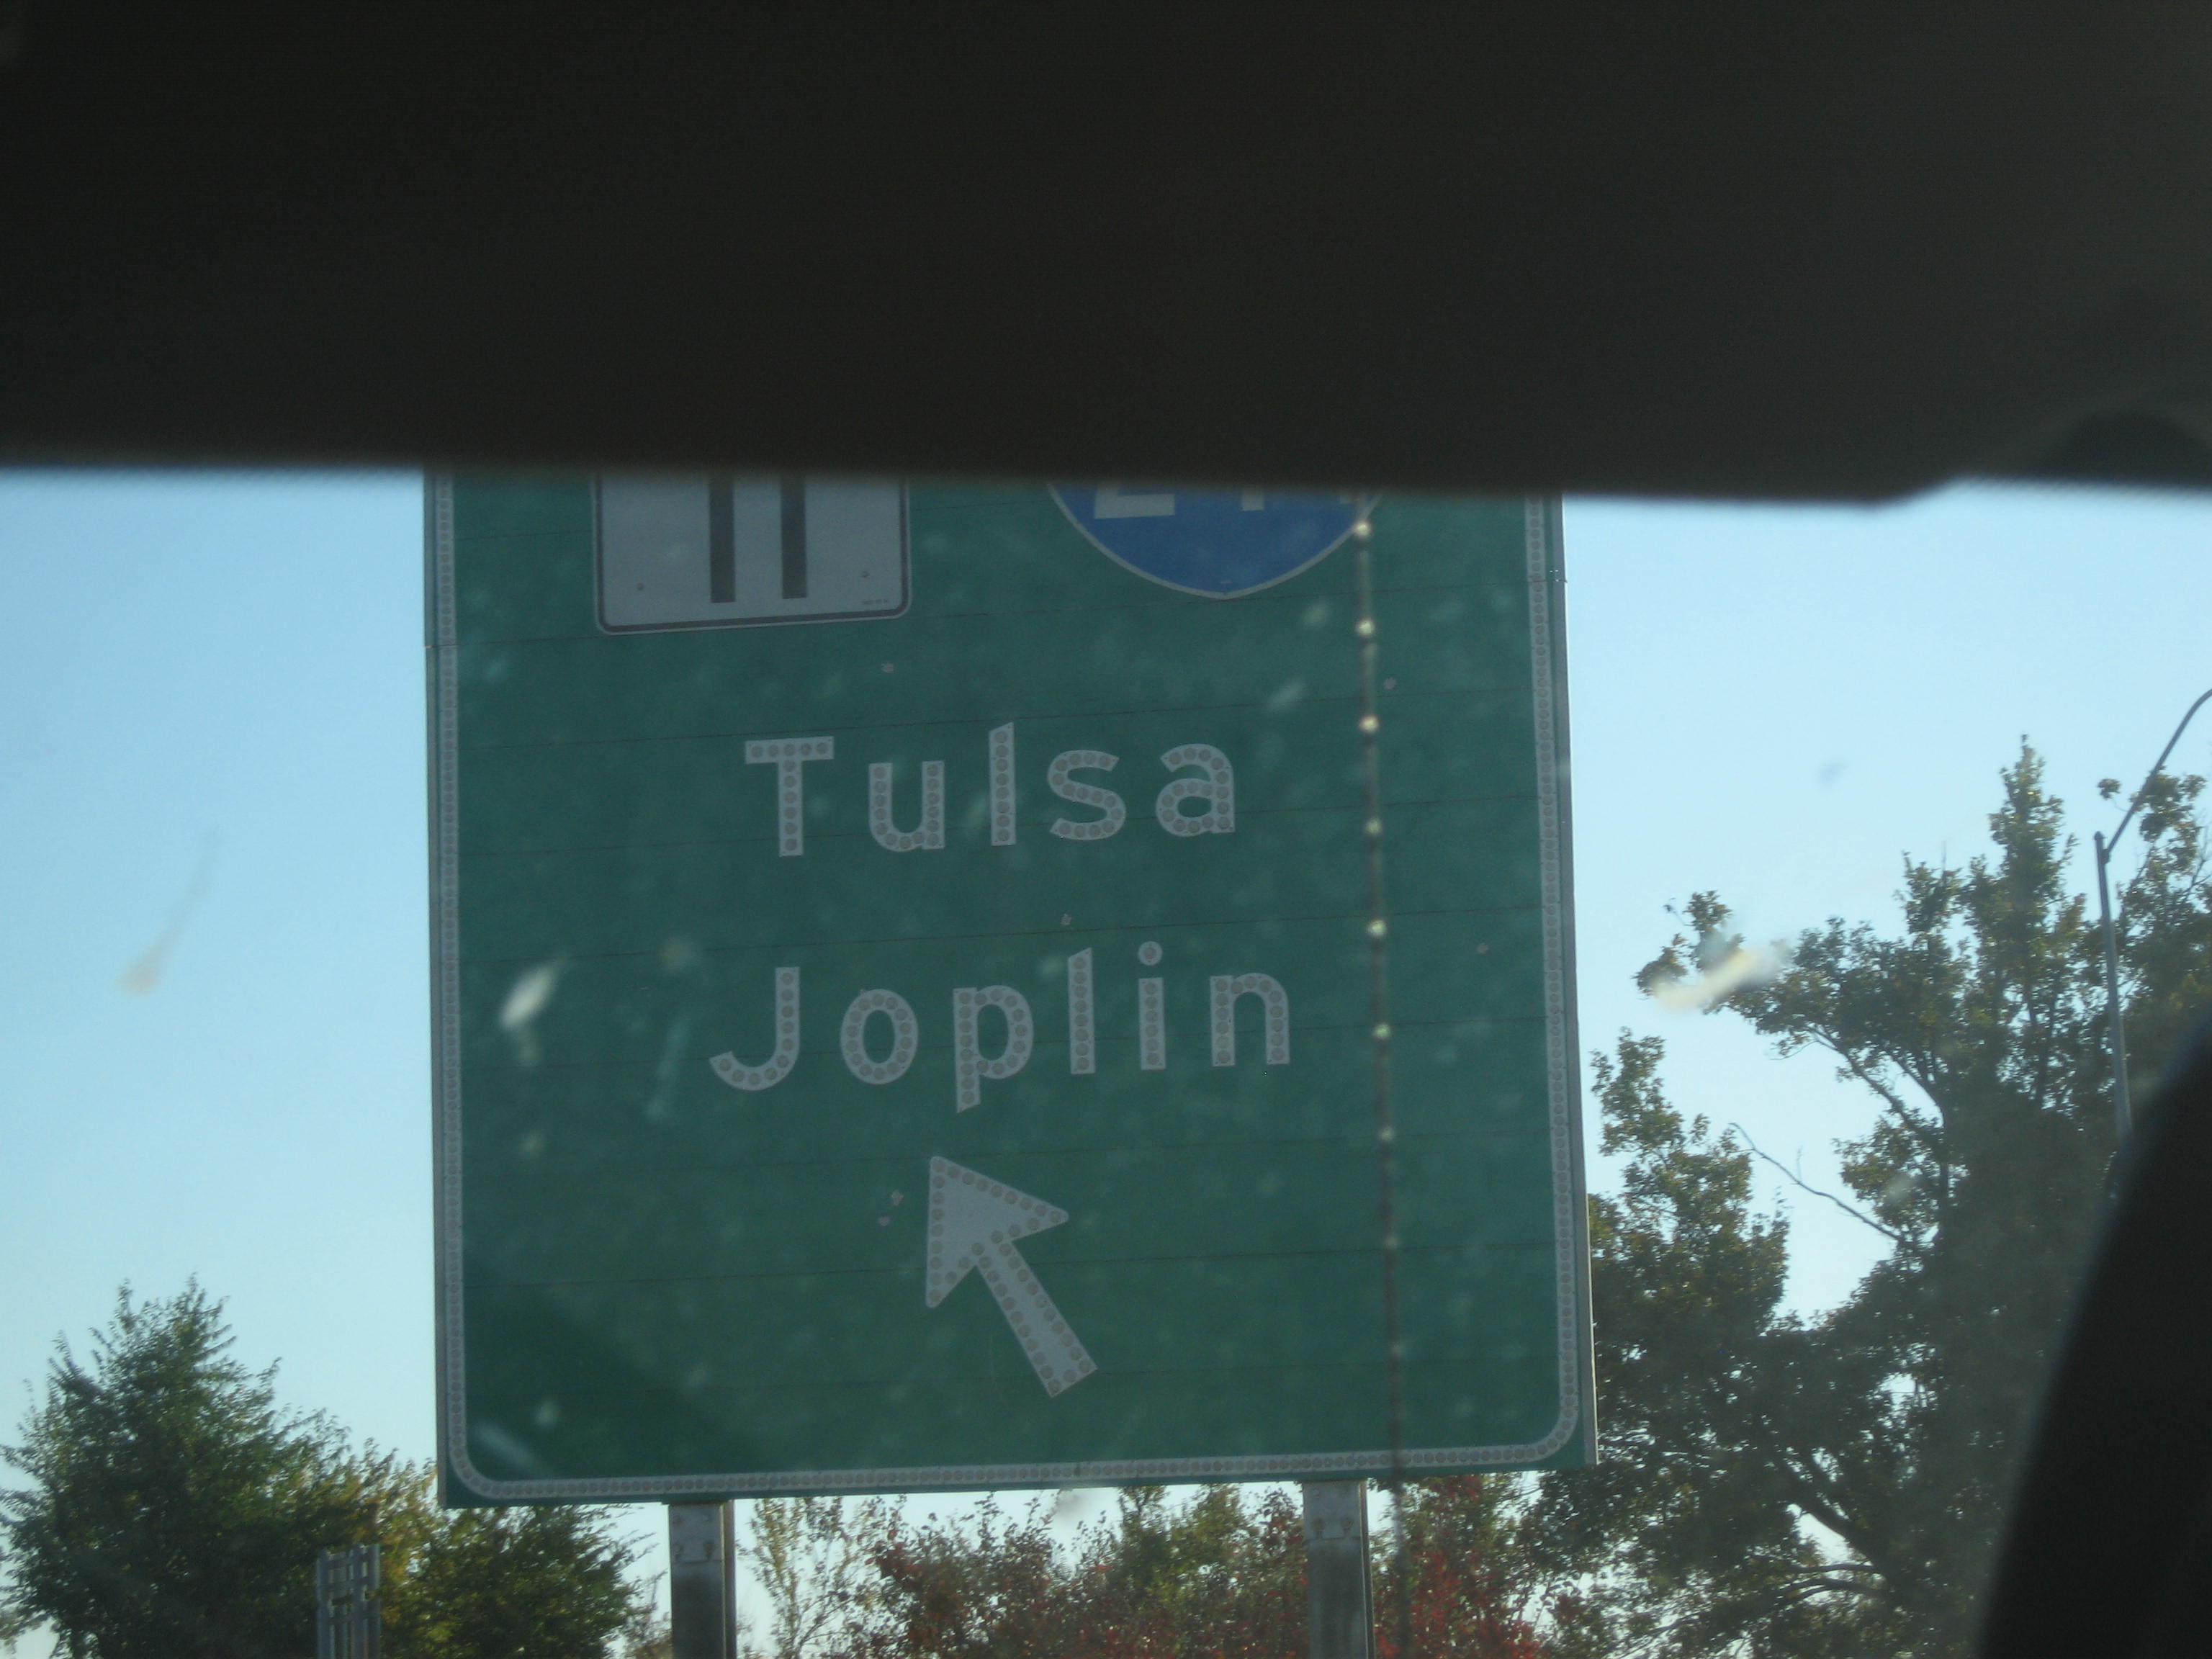 Tulsa, the 2nd largest city in Oklahoma